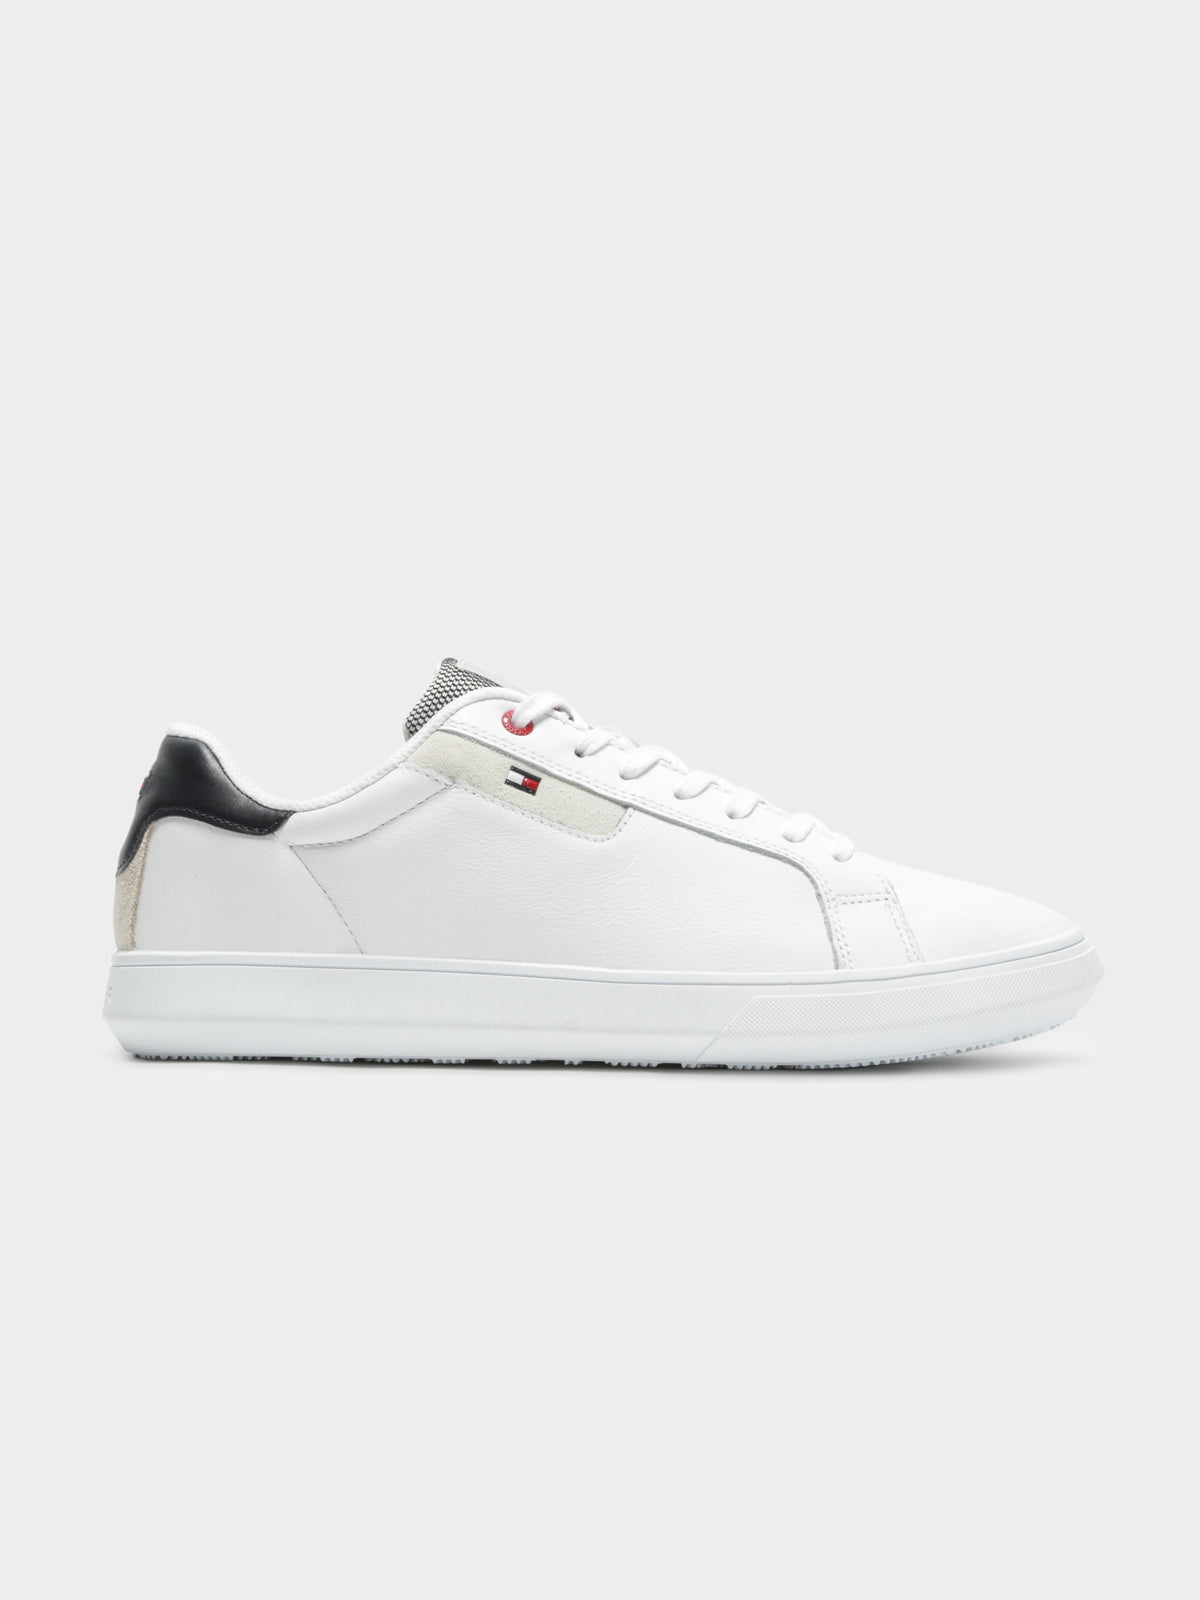 Mens Essential Leather Cupsole Sneakers in White